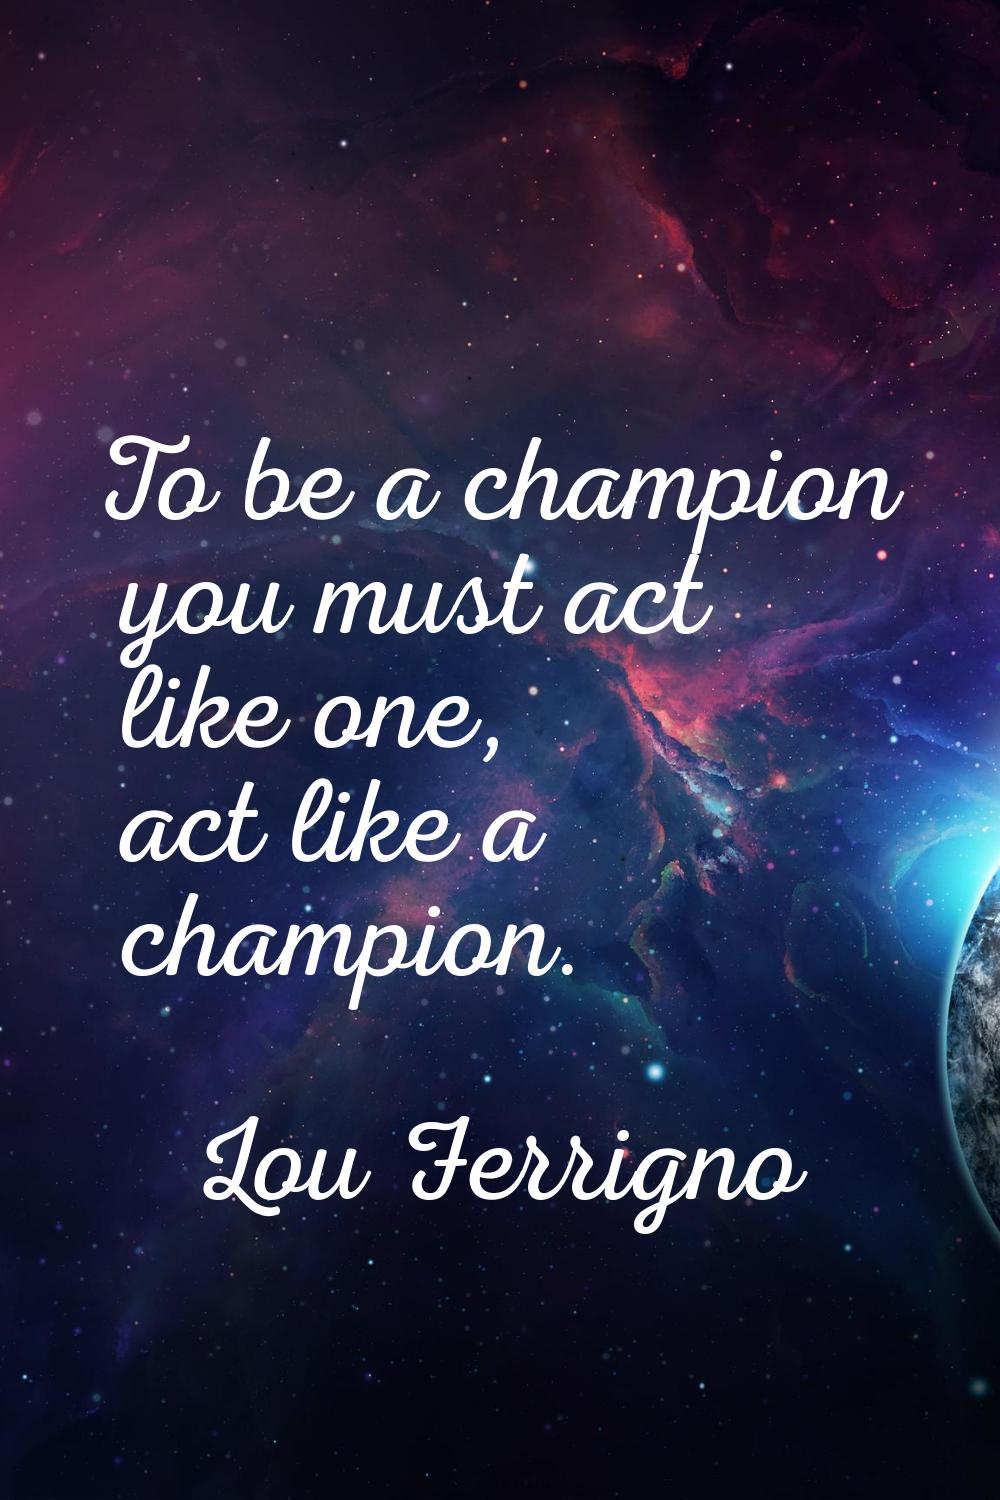 To be a champion you must act like one, act like a champion.